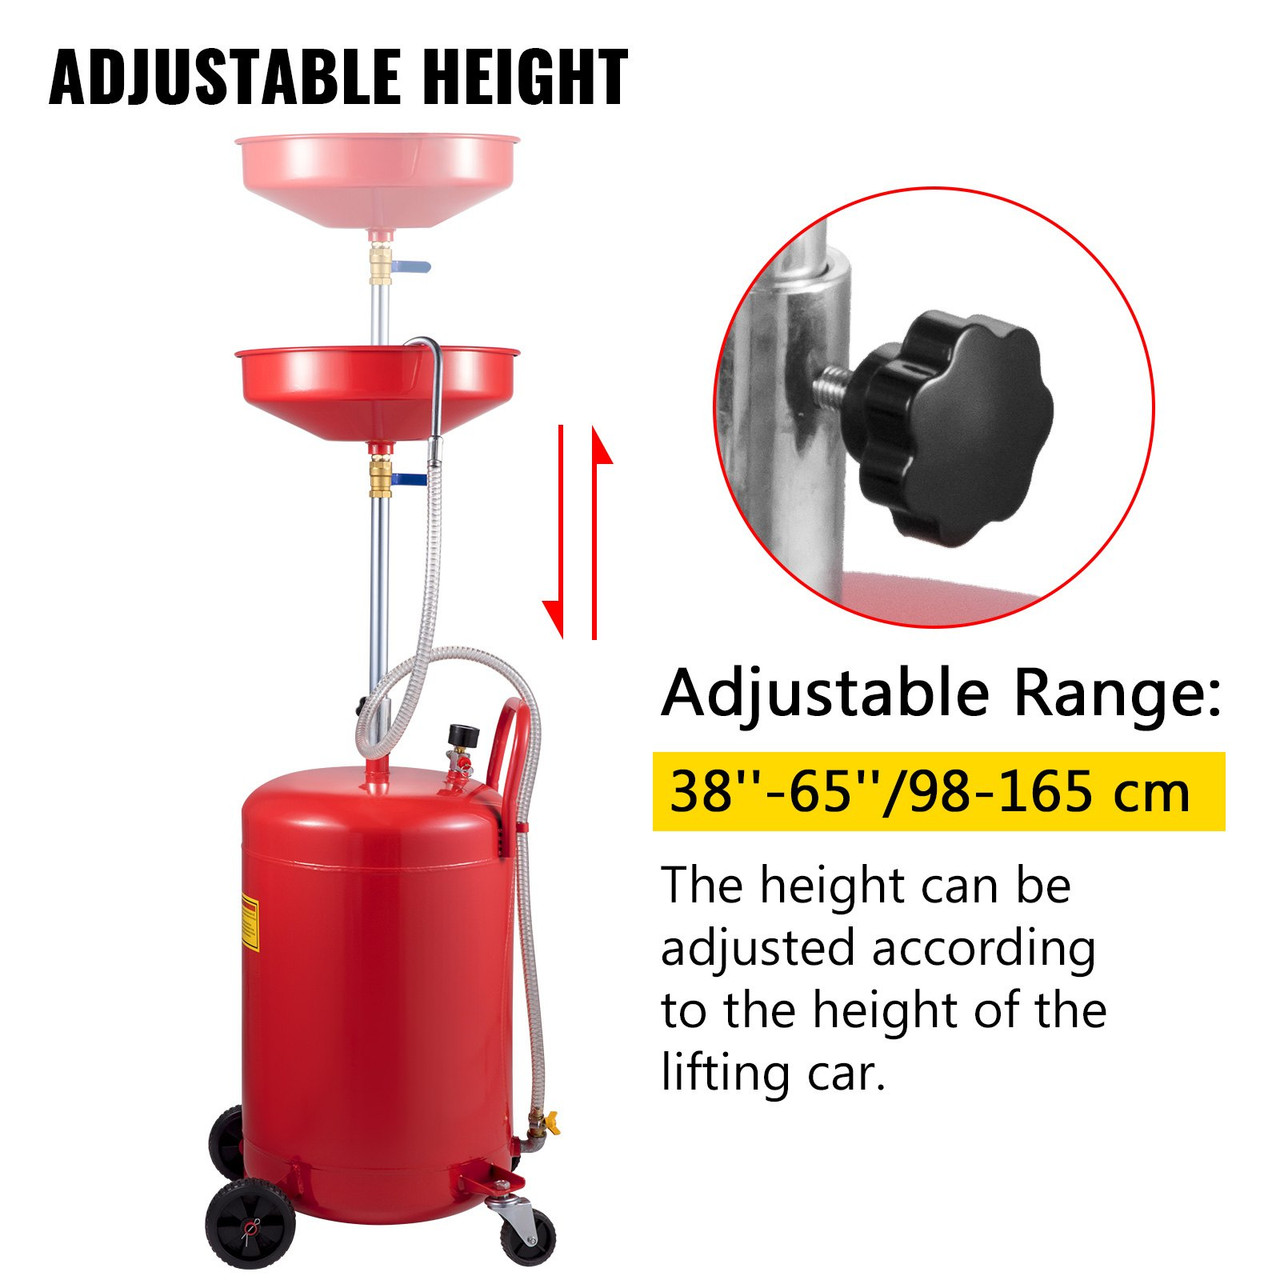 Waste Oil Drain Tank 20 Gallon Portable Oil Drain Air Operated Drainer Oil Change, Oil Drain Container, Fluid Fuel Transfer Drainage Adjustable Funnel Height, with Wheel for Easy Oil Removal